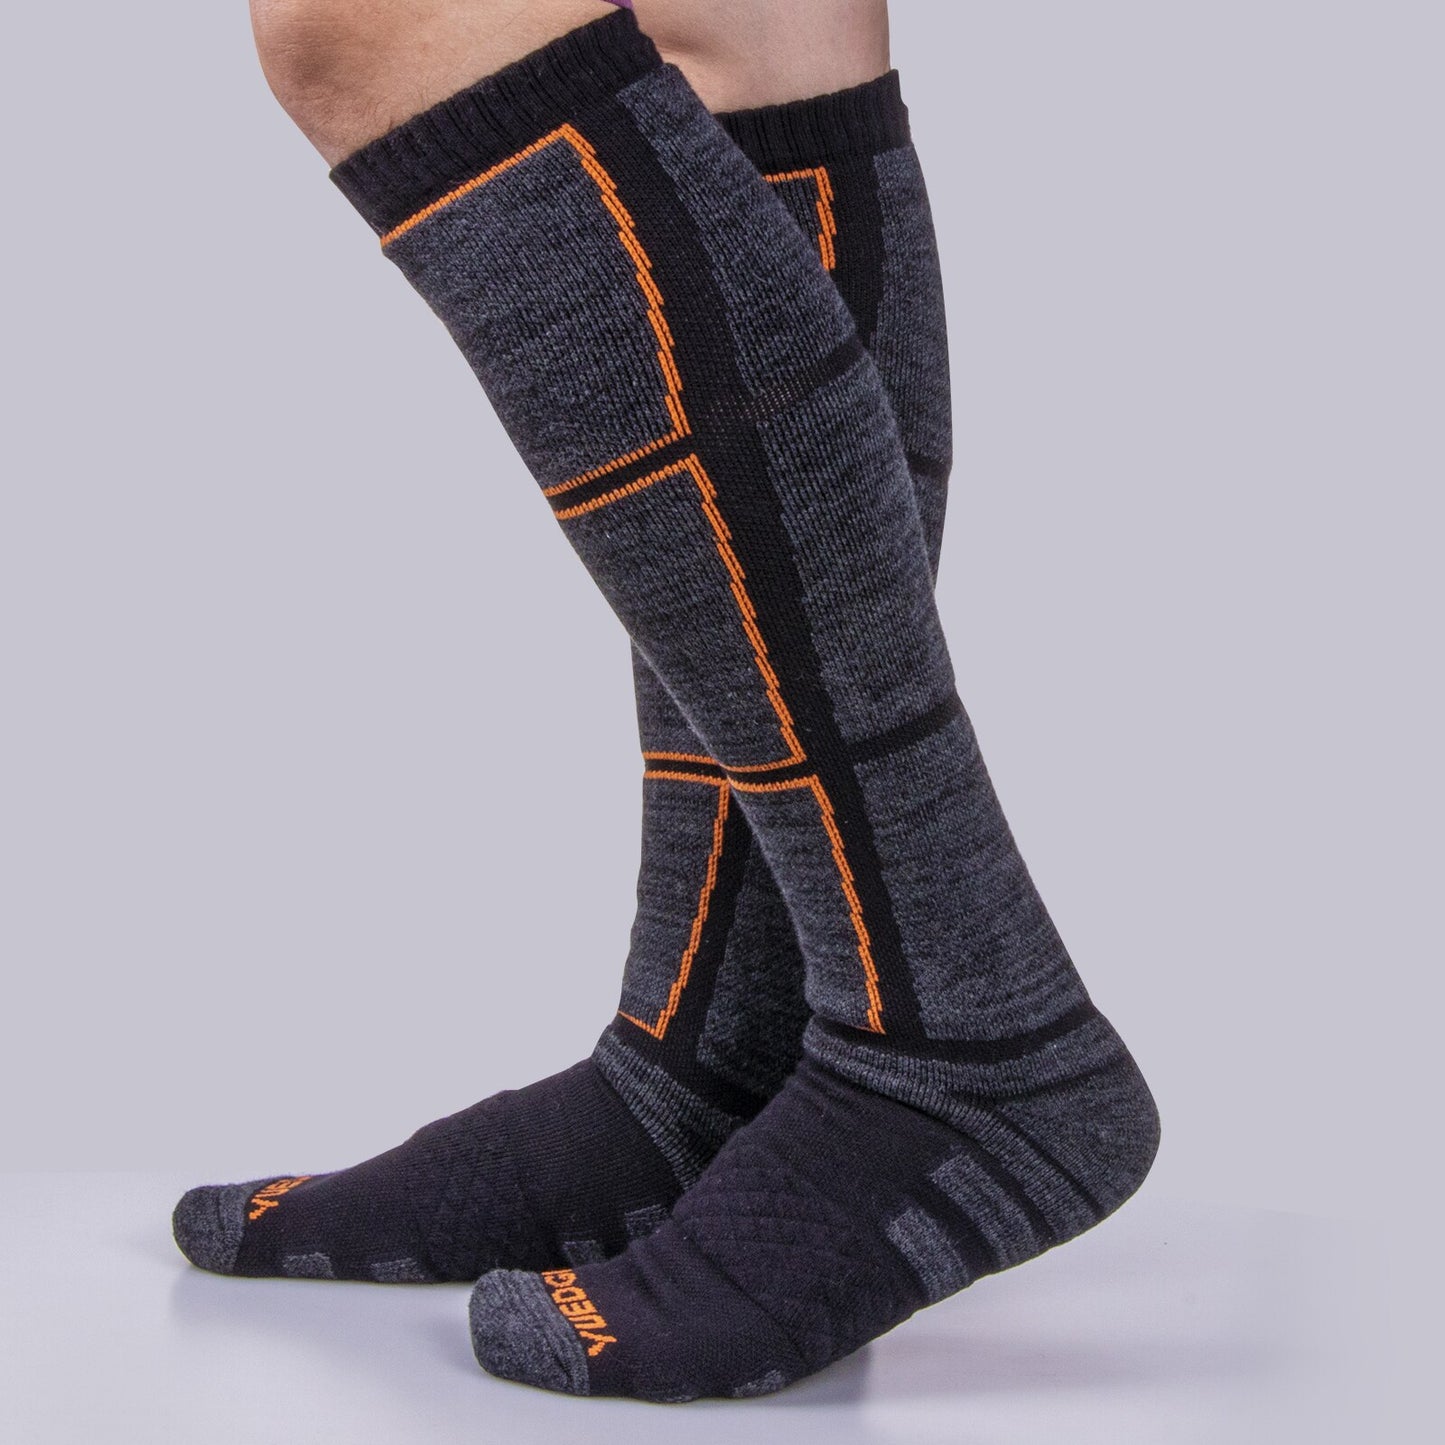 2Pair High Quality Cotton Cushioned Snowboarding Skiing Socks Winter Thick Warm Thermal Sports Ski Socks Size 36-44